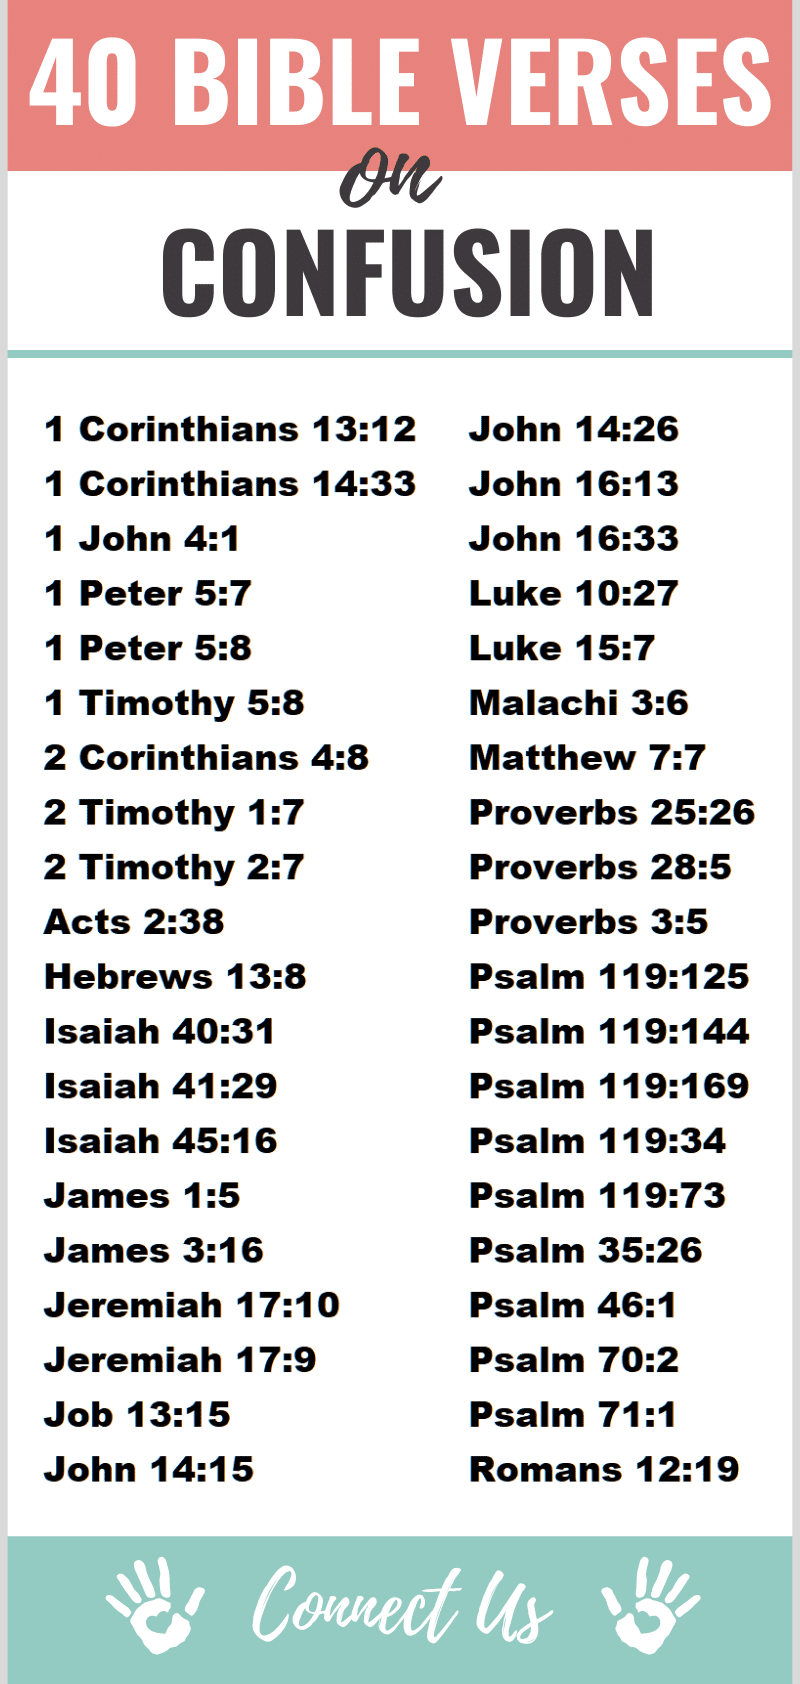 Bible Verses on Confusion